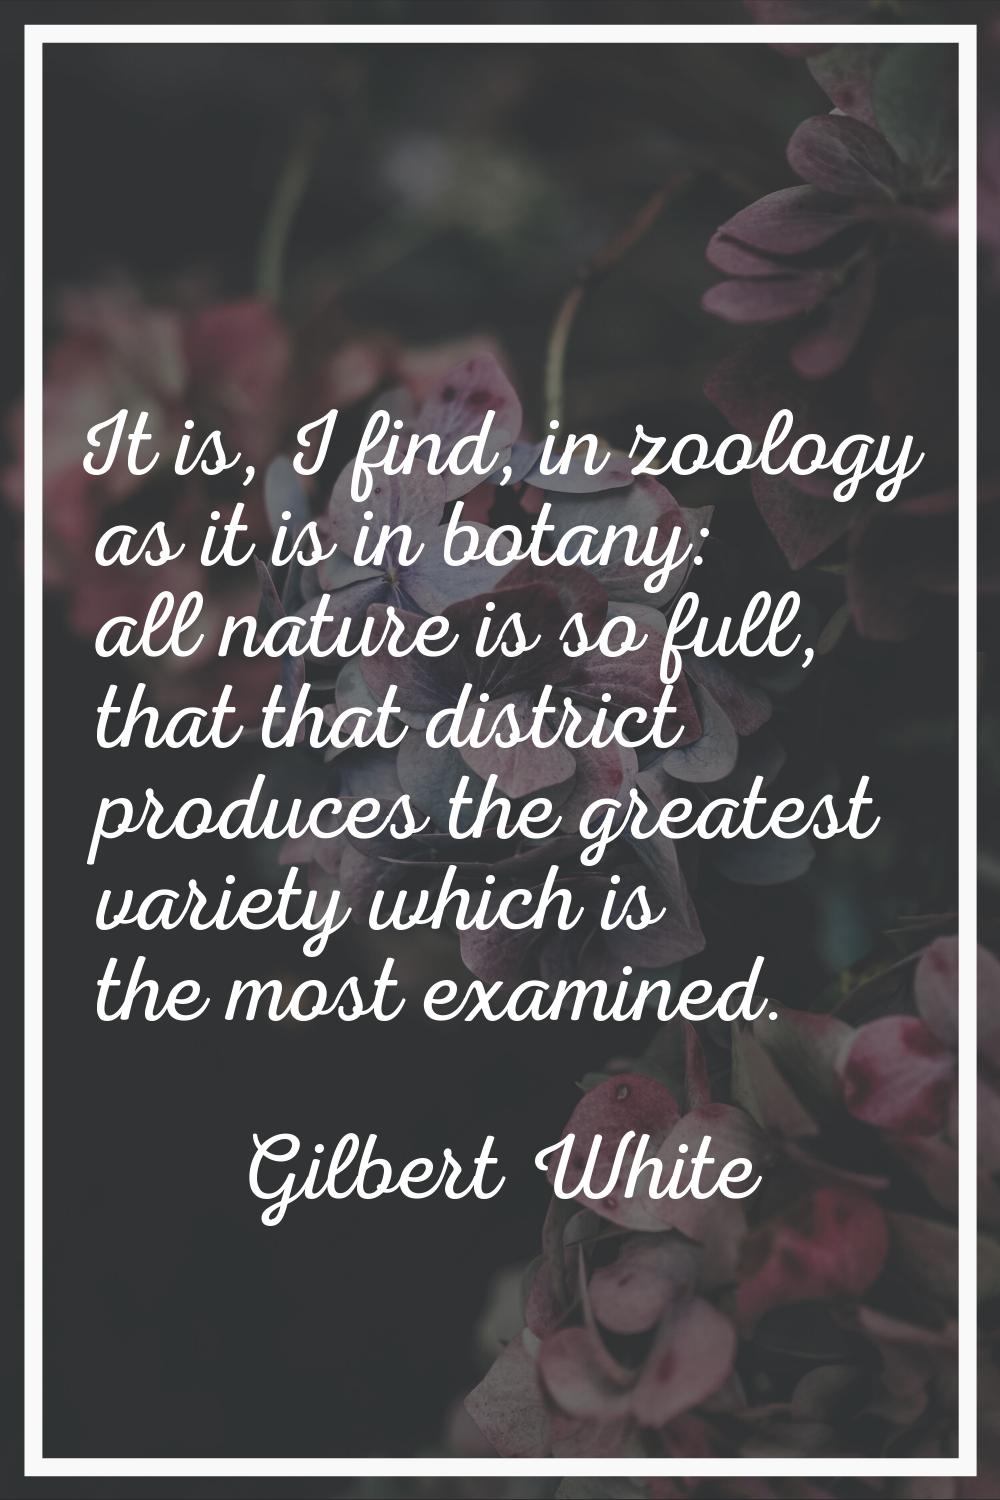 It is, I find, in zoology as it is in botany: all nature is so full, that that district produces th